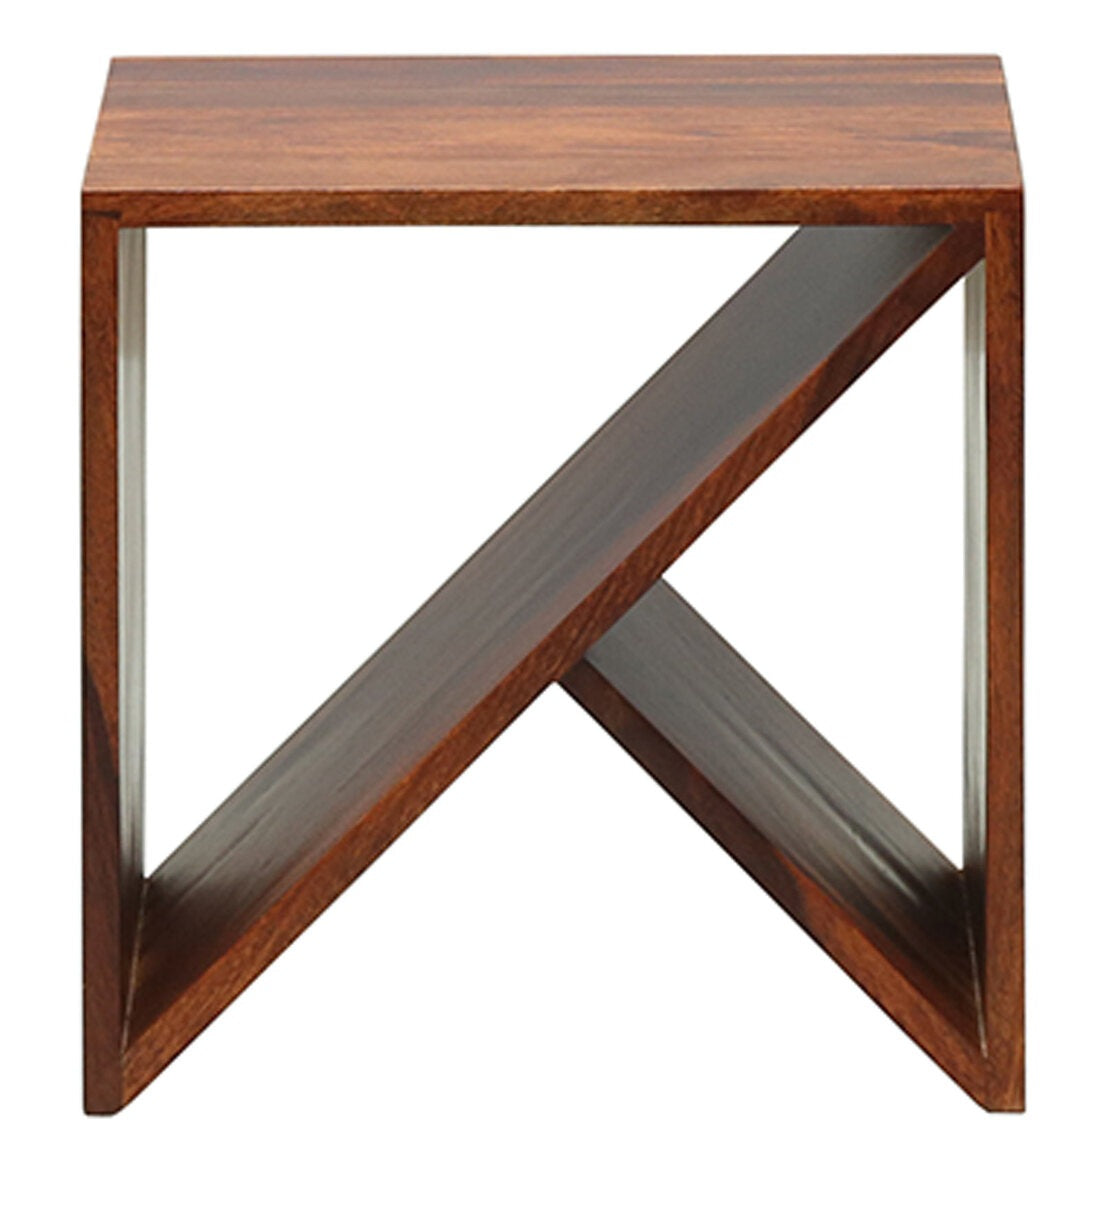 Wooden Peg Table